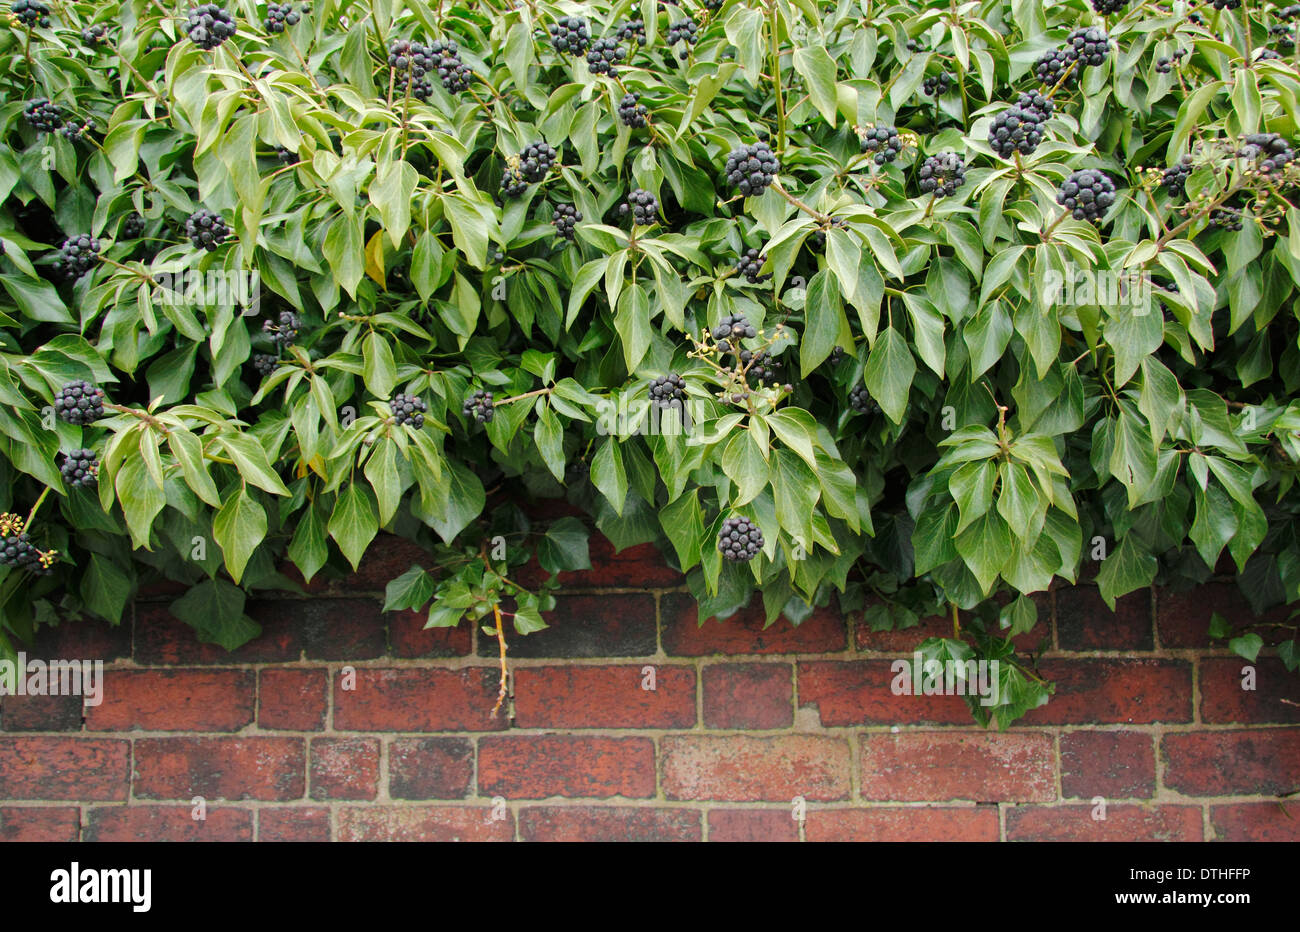 Common ivy (Hedera Helix) gowing up red brick wall showing flowers that have turned into black berries, England, UK Stock Photo